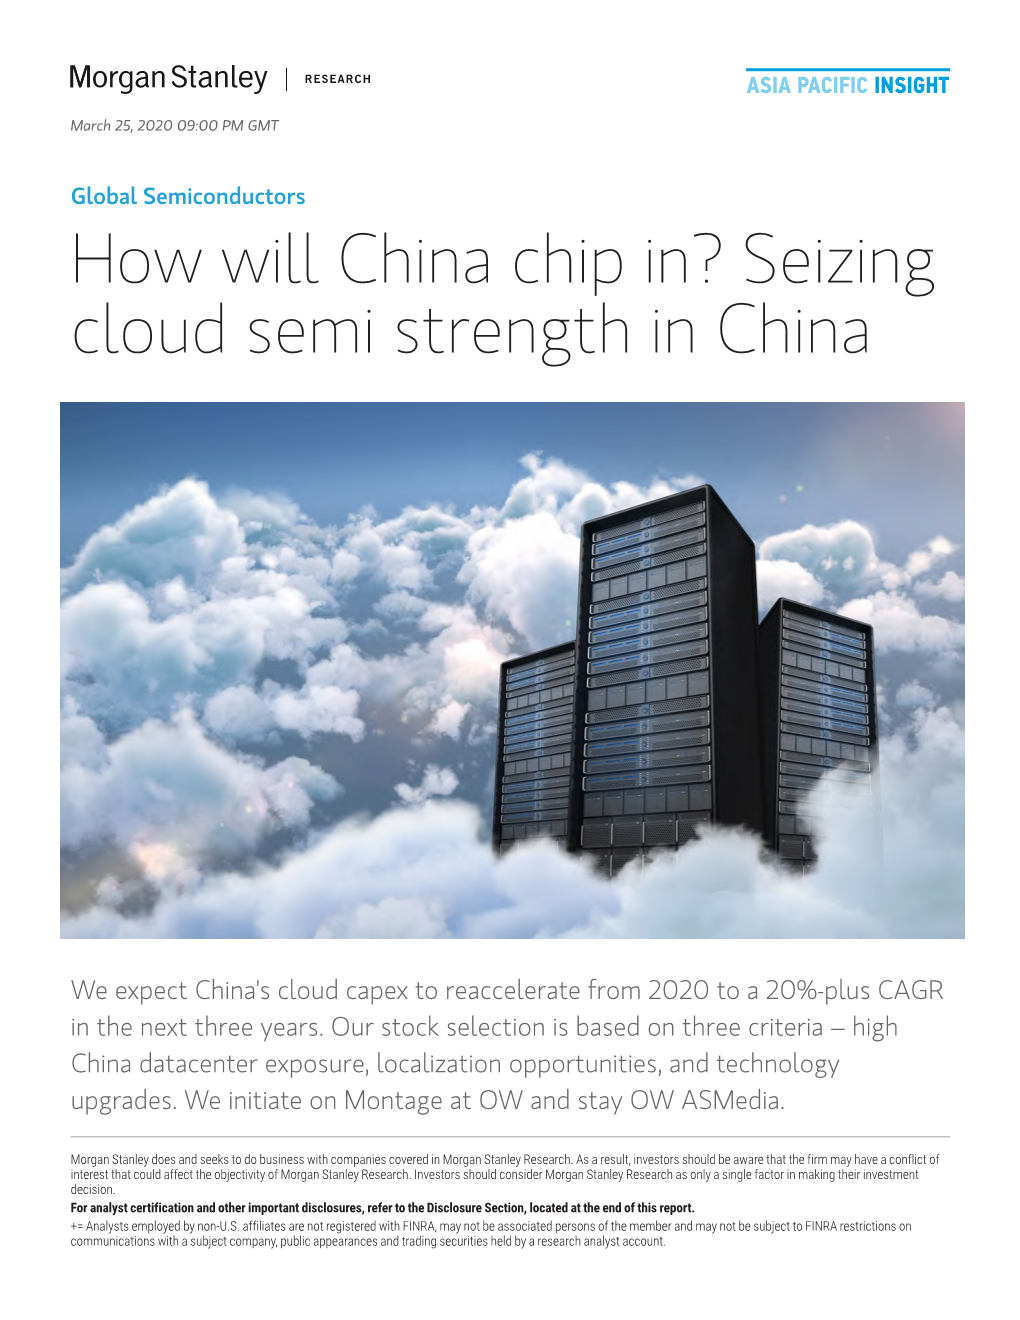 M How Will China Chip In? Seizing Cloud Semi Strength in China